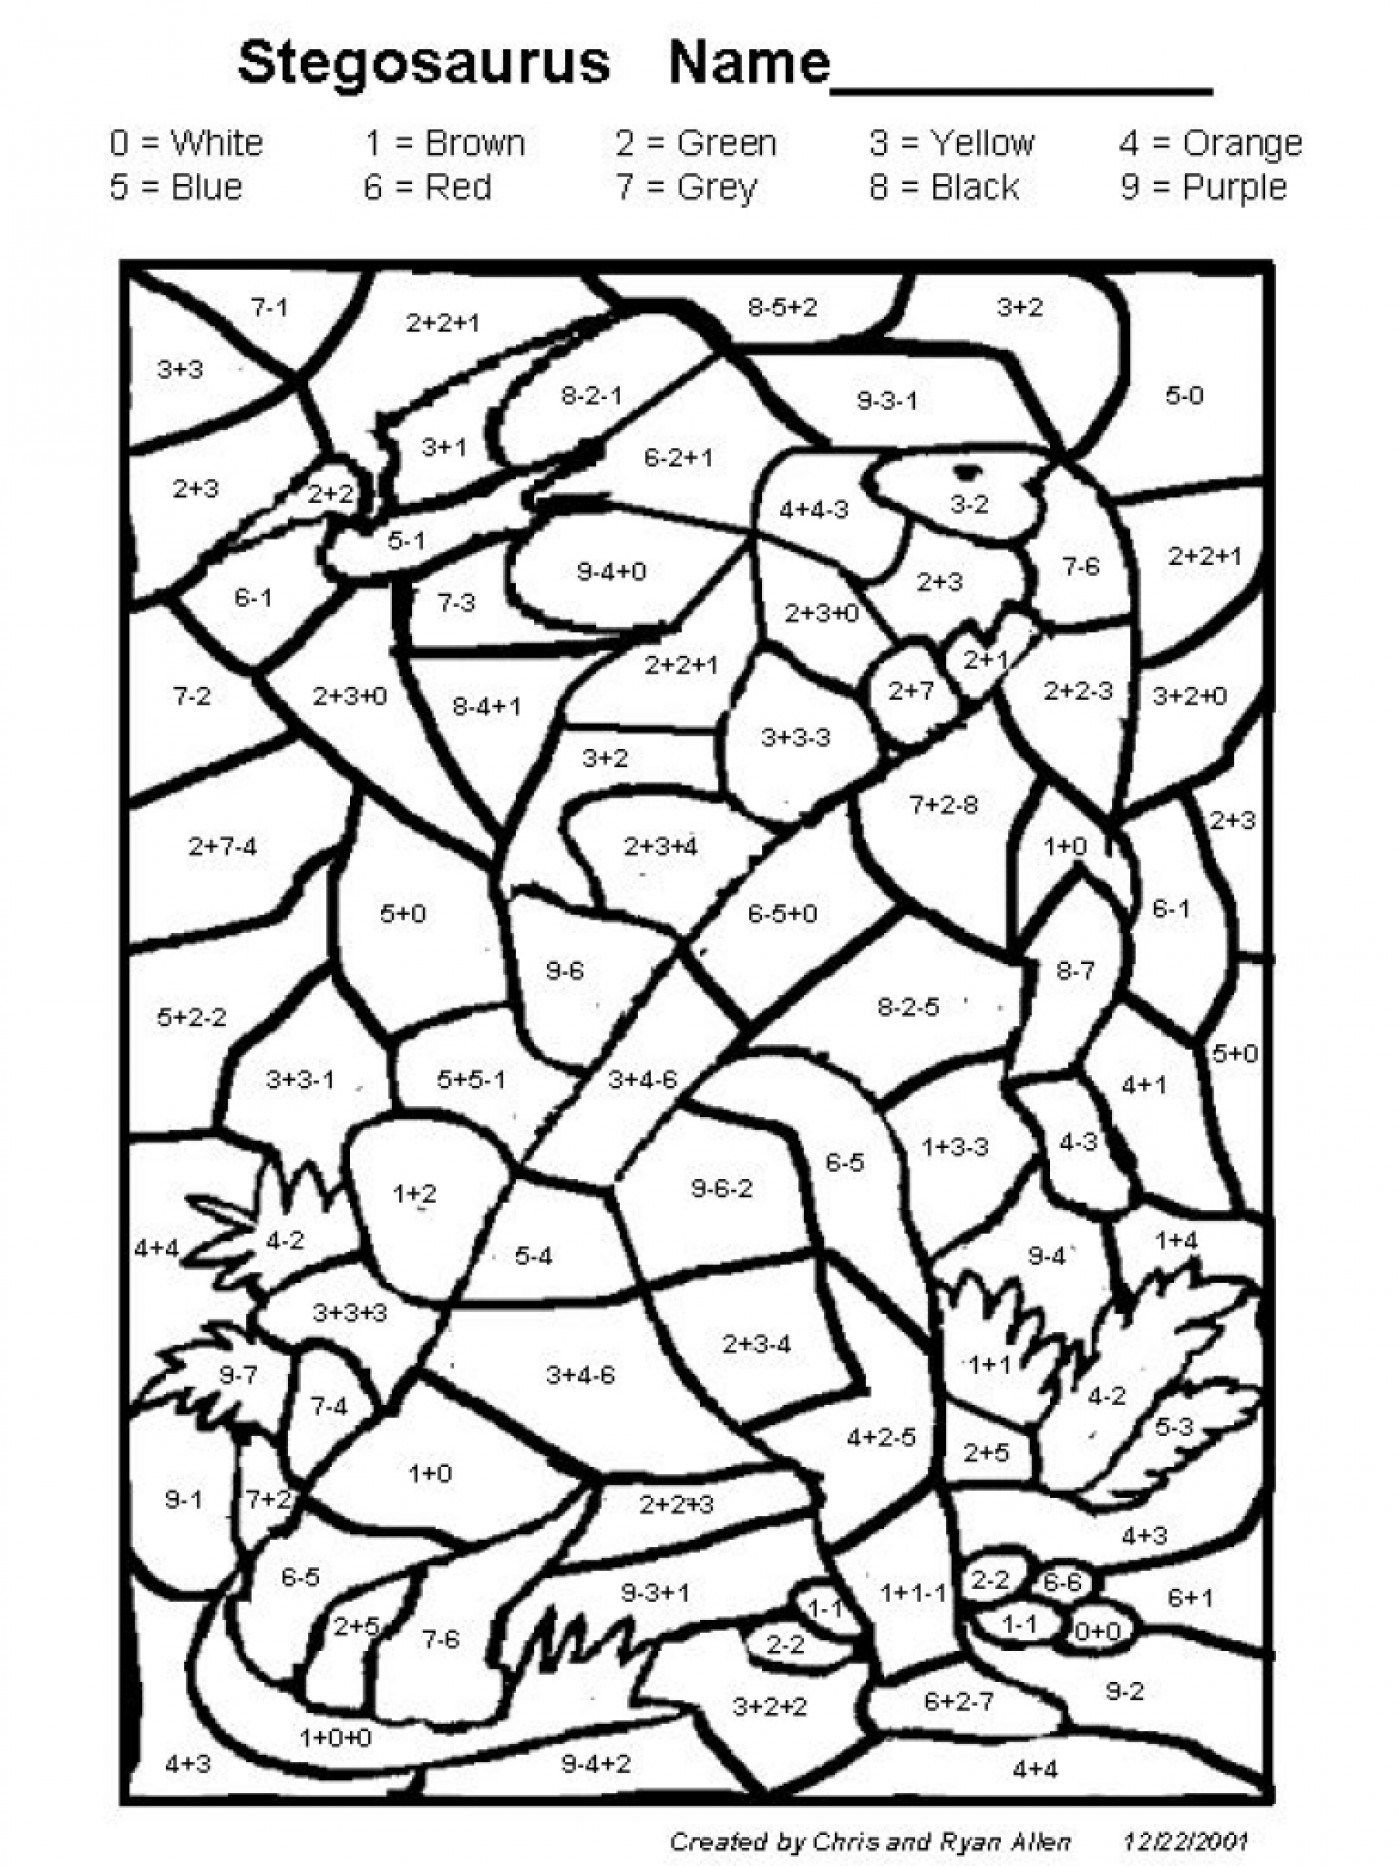 Excellent Image of Addition Coloring Pages - davemelillo.com | Math  coloring worksheets, Fun math worksheets, Christmas math worksheets